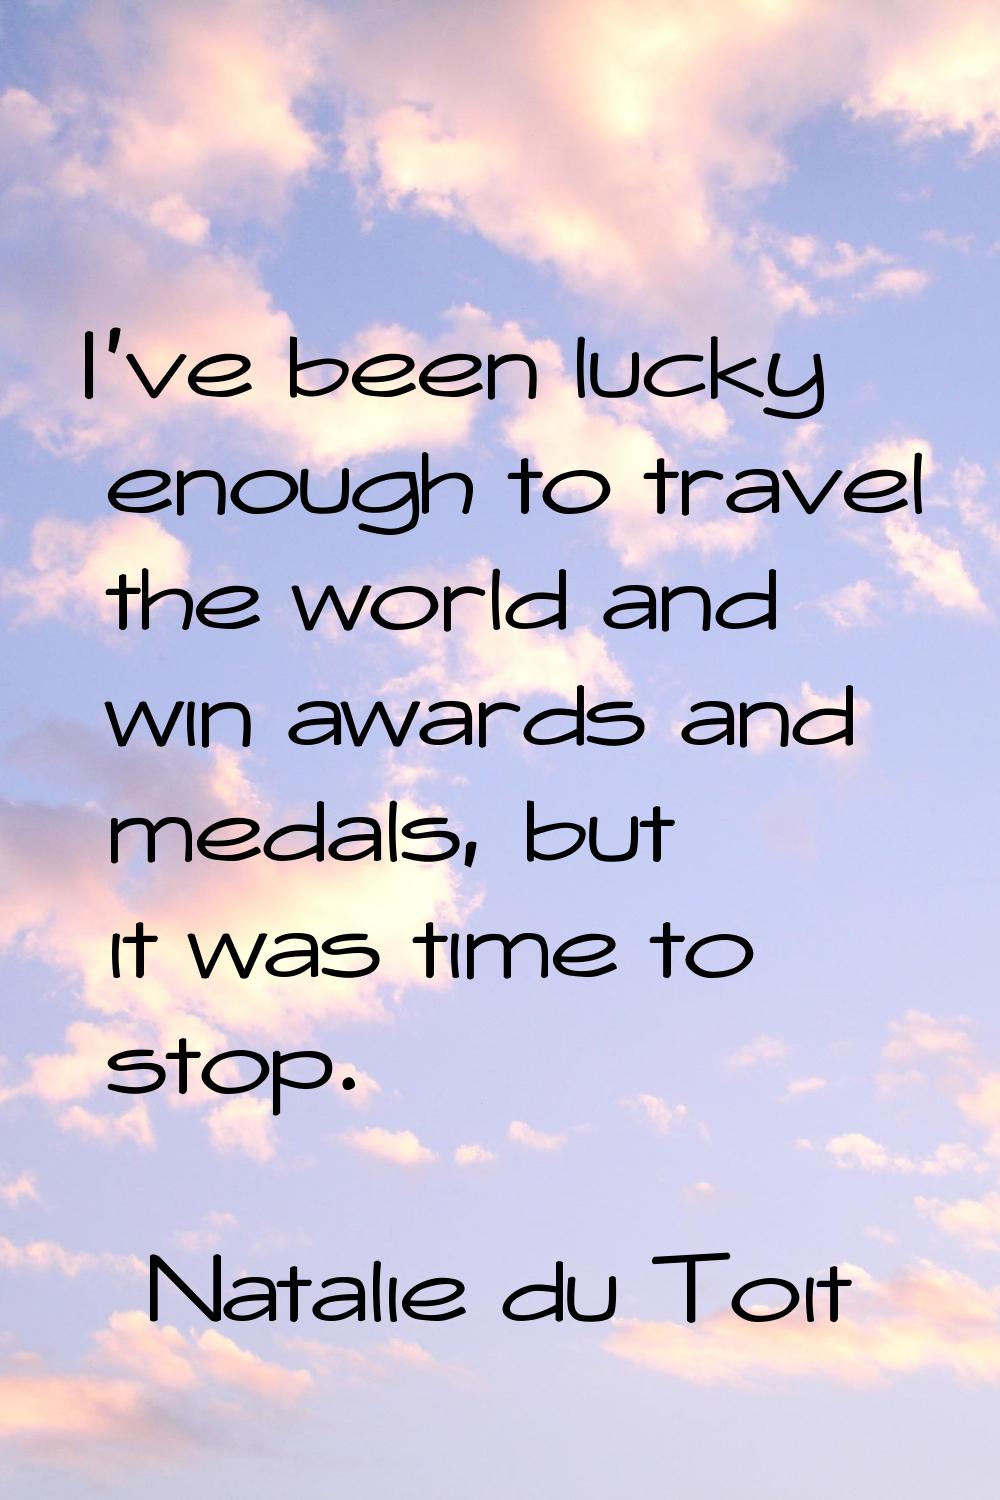 I've been lucky enough to travel the world and win awards and medals, but it was time to stop.